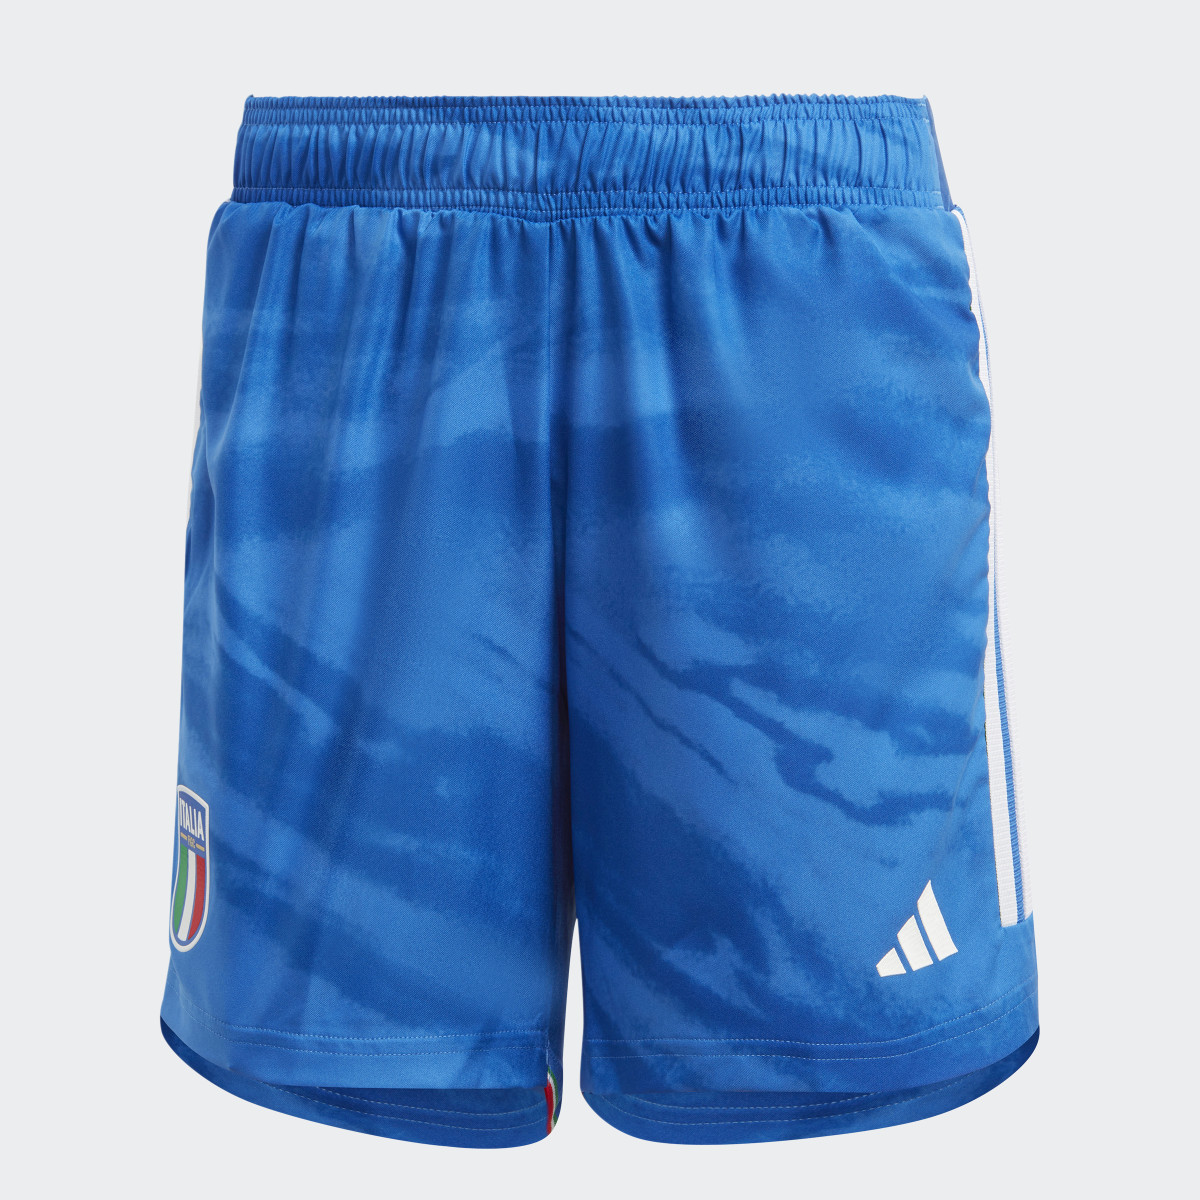 Adidas Italy Women's Team 23 Home Authentic Shorts. 4